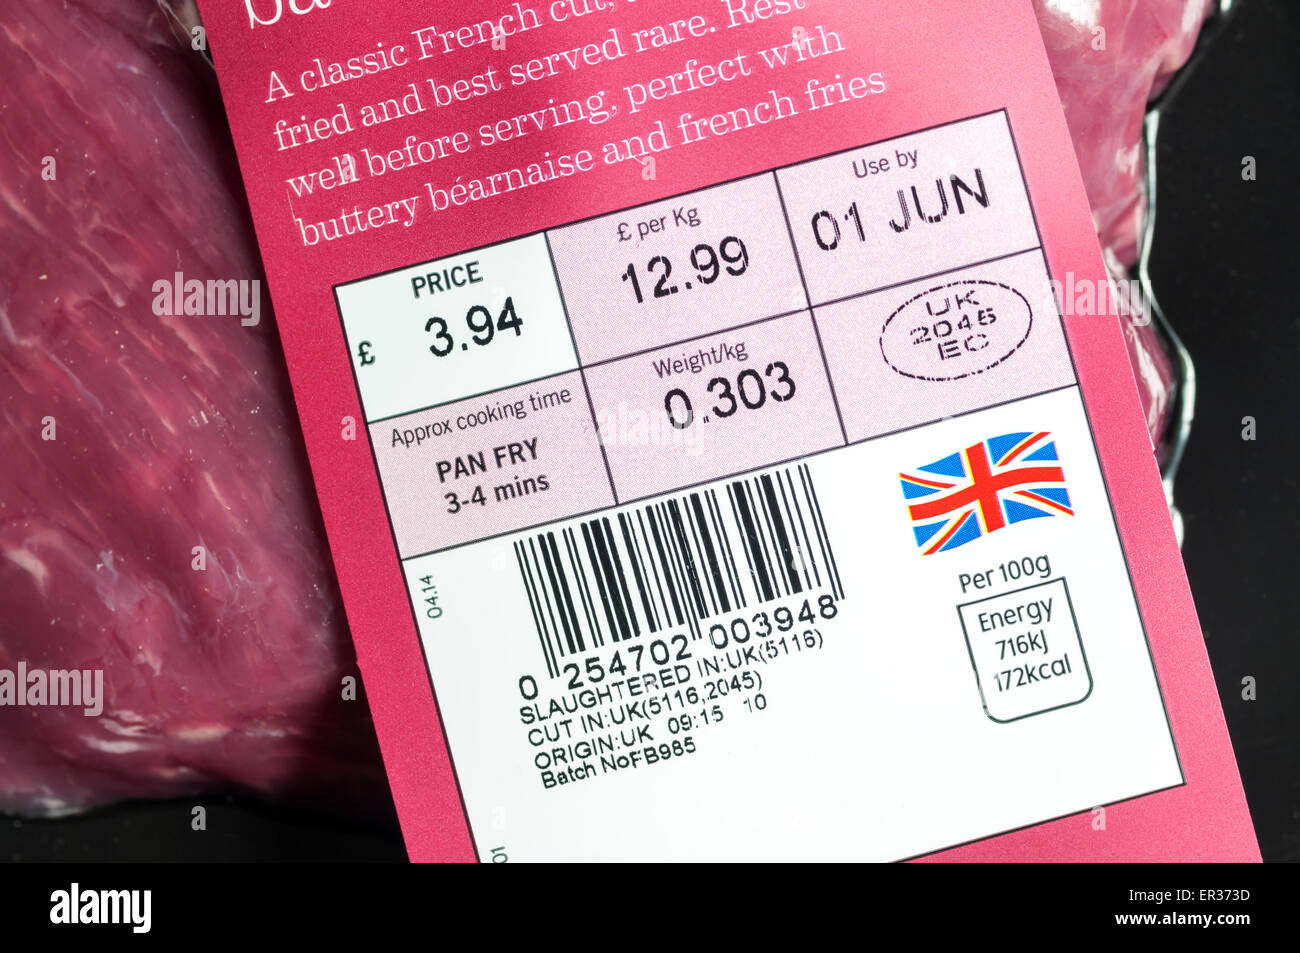 Slaughtered in UK label on a pack of British bavette steak. Stock Photo